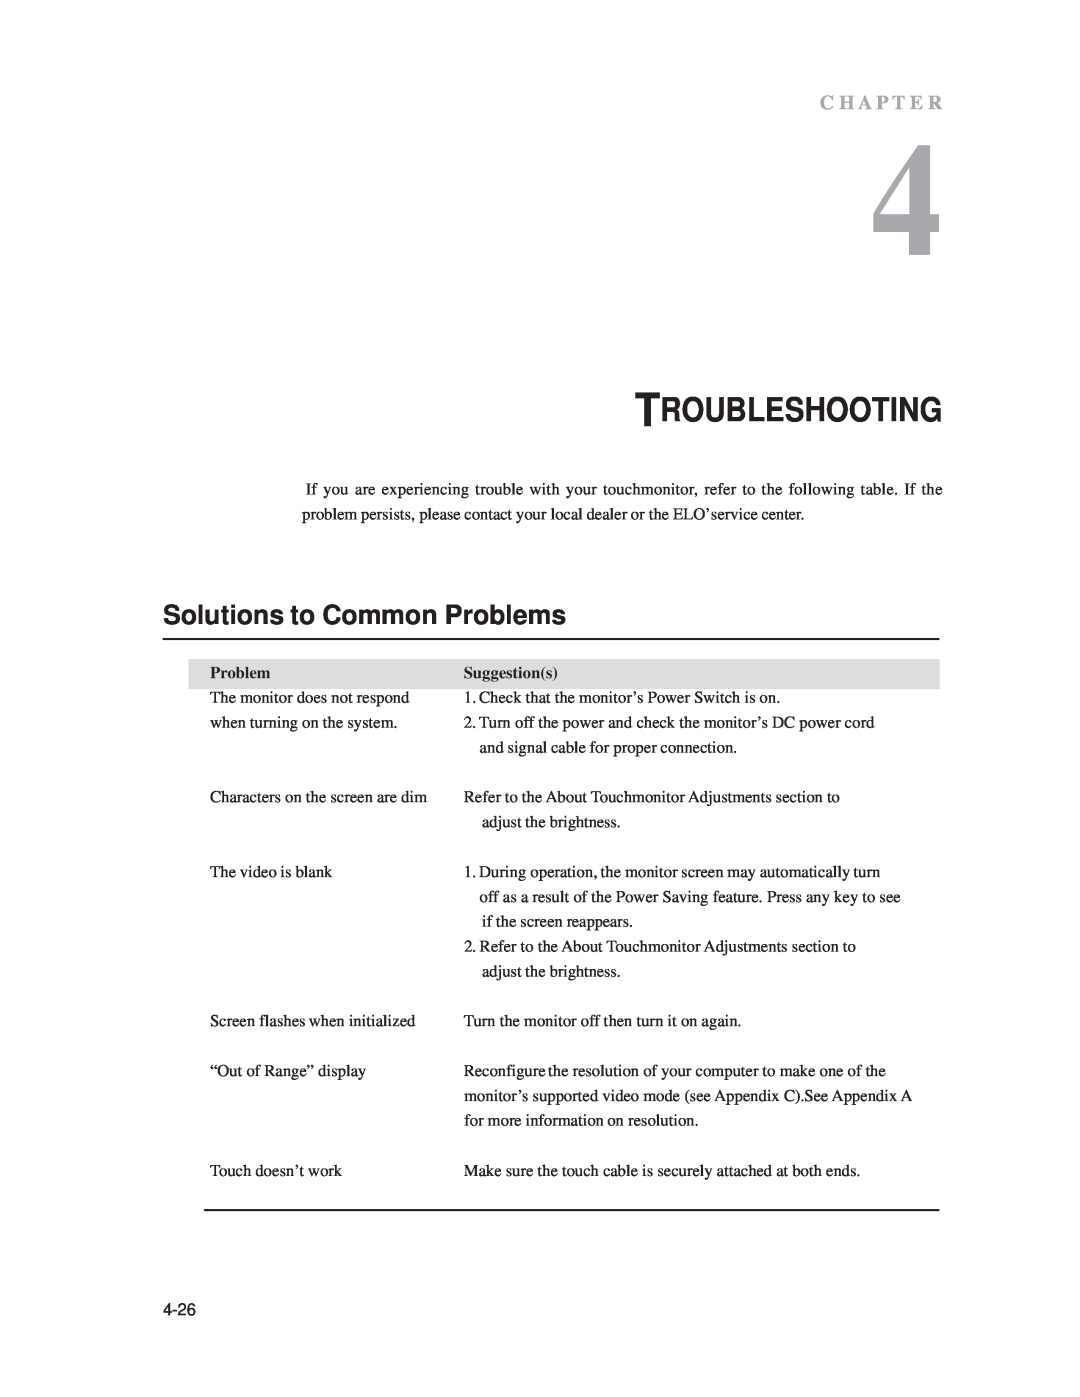 Elo TouchSystems 1919L, 1519L manual Troubleshooting, Solutions to Common Problems, 4-26, C H A P T E R 